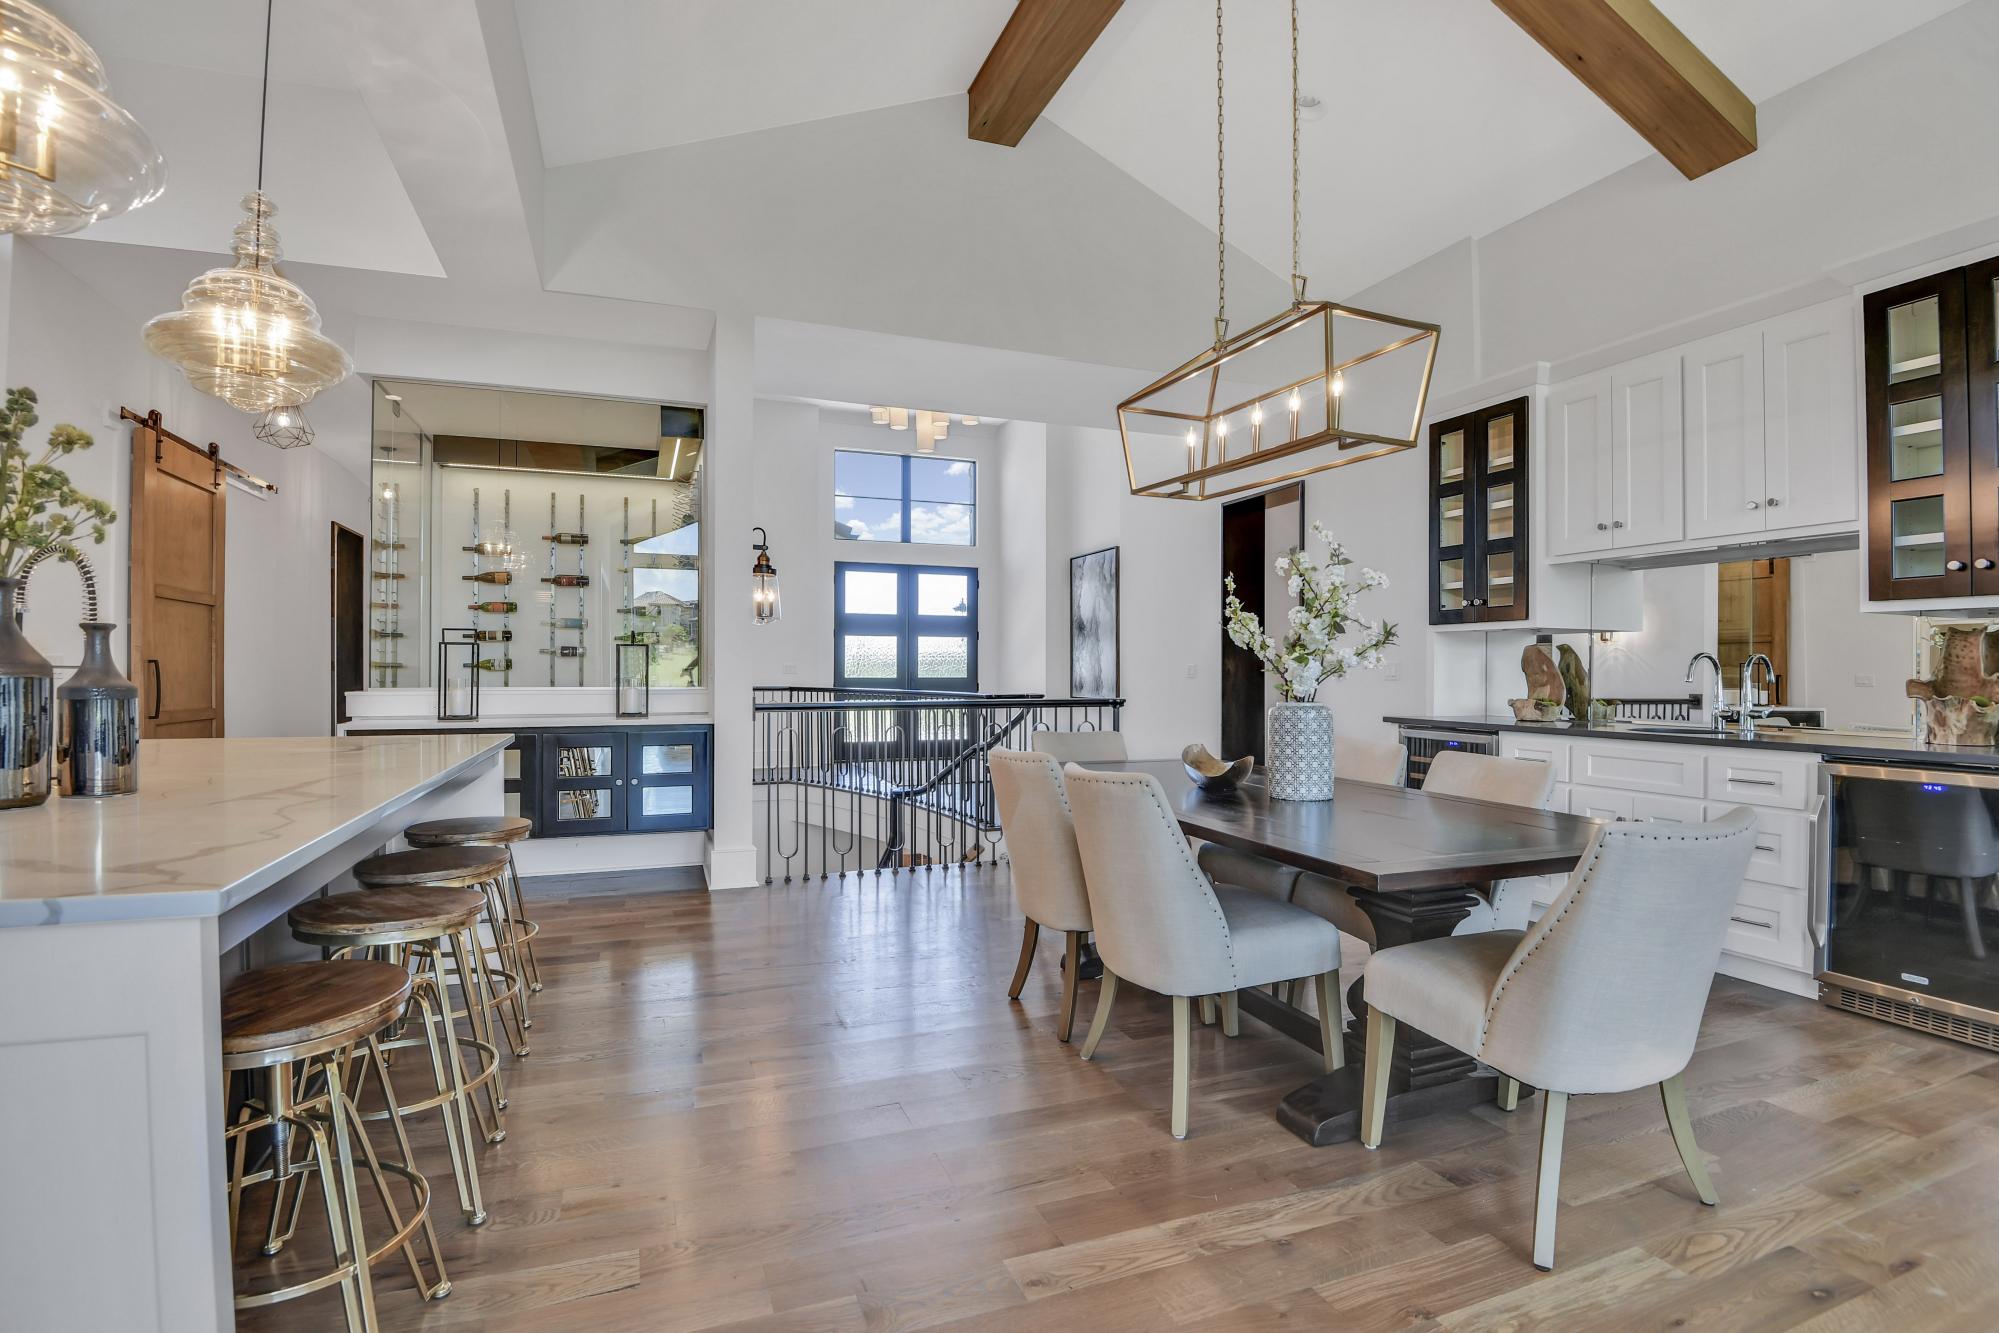 Kitchen and dining room area in an Oakmont model from Lambie Custom Homes